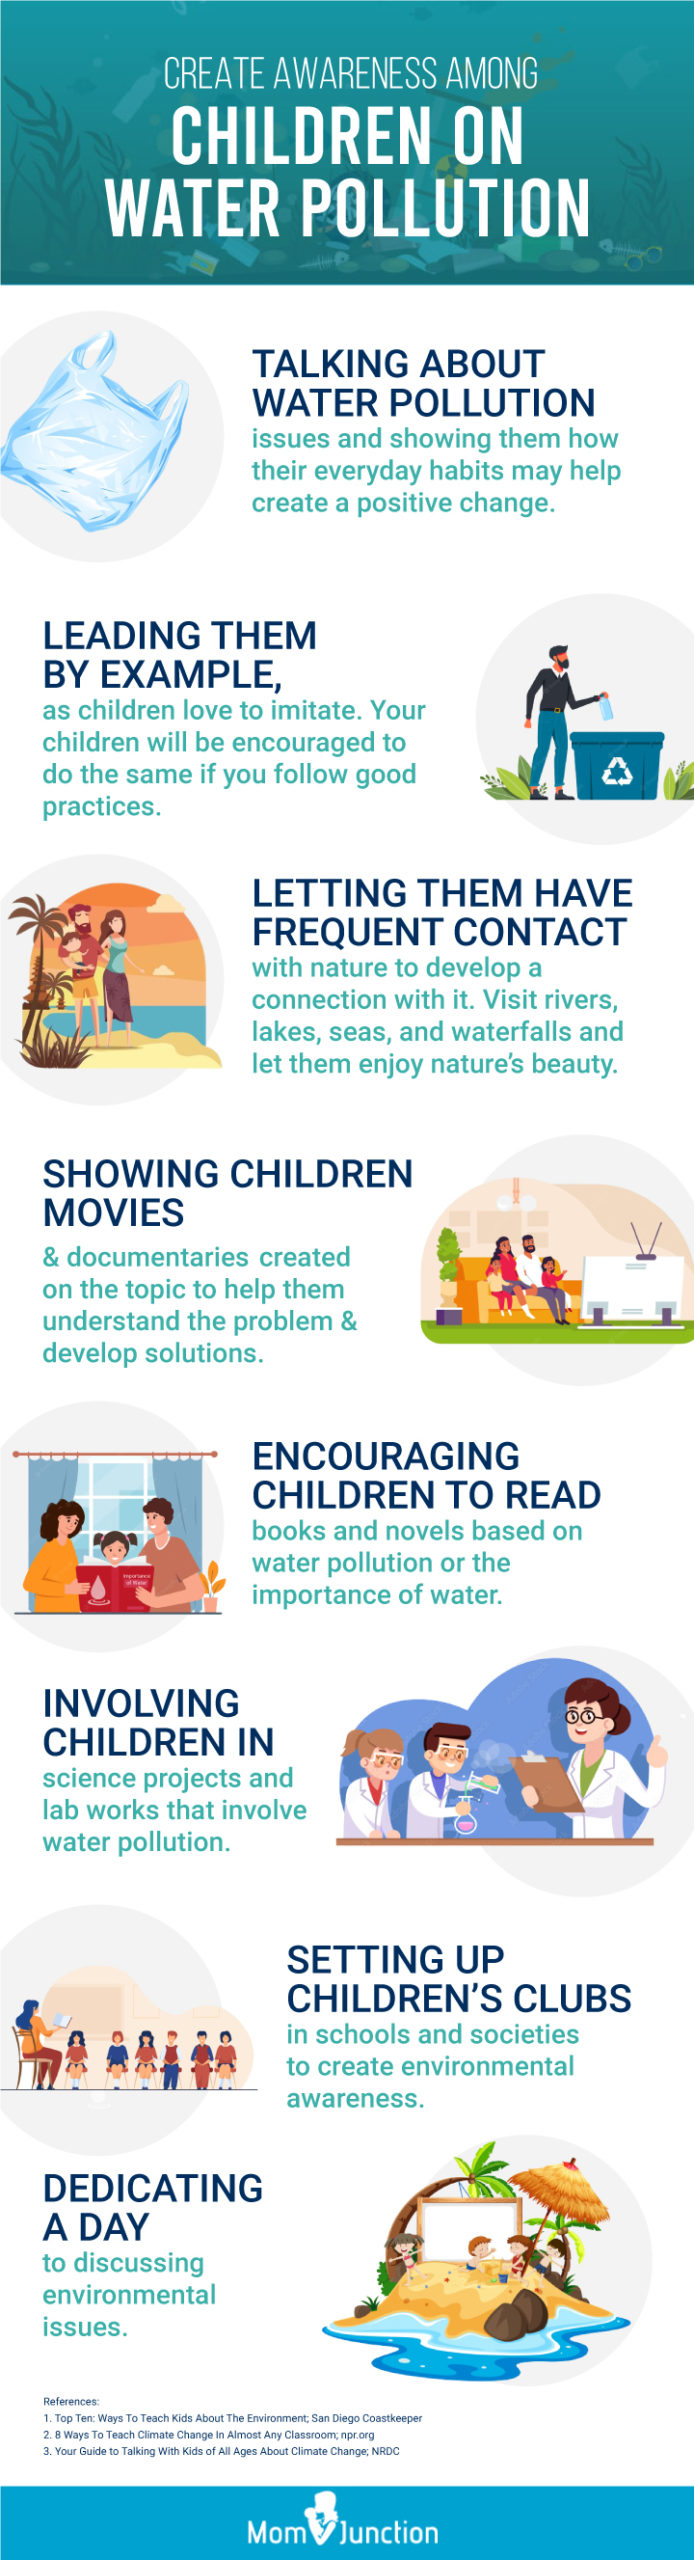 create awareness about water pollution among children [infographic]